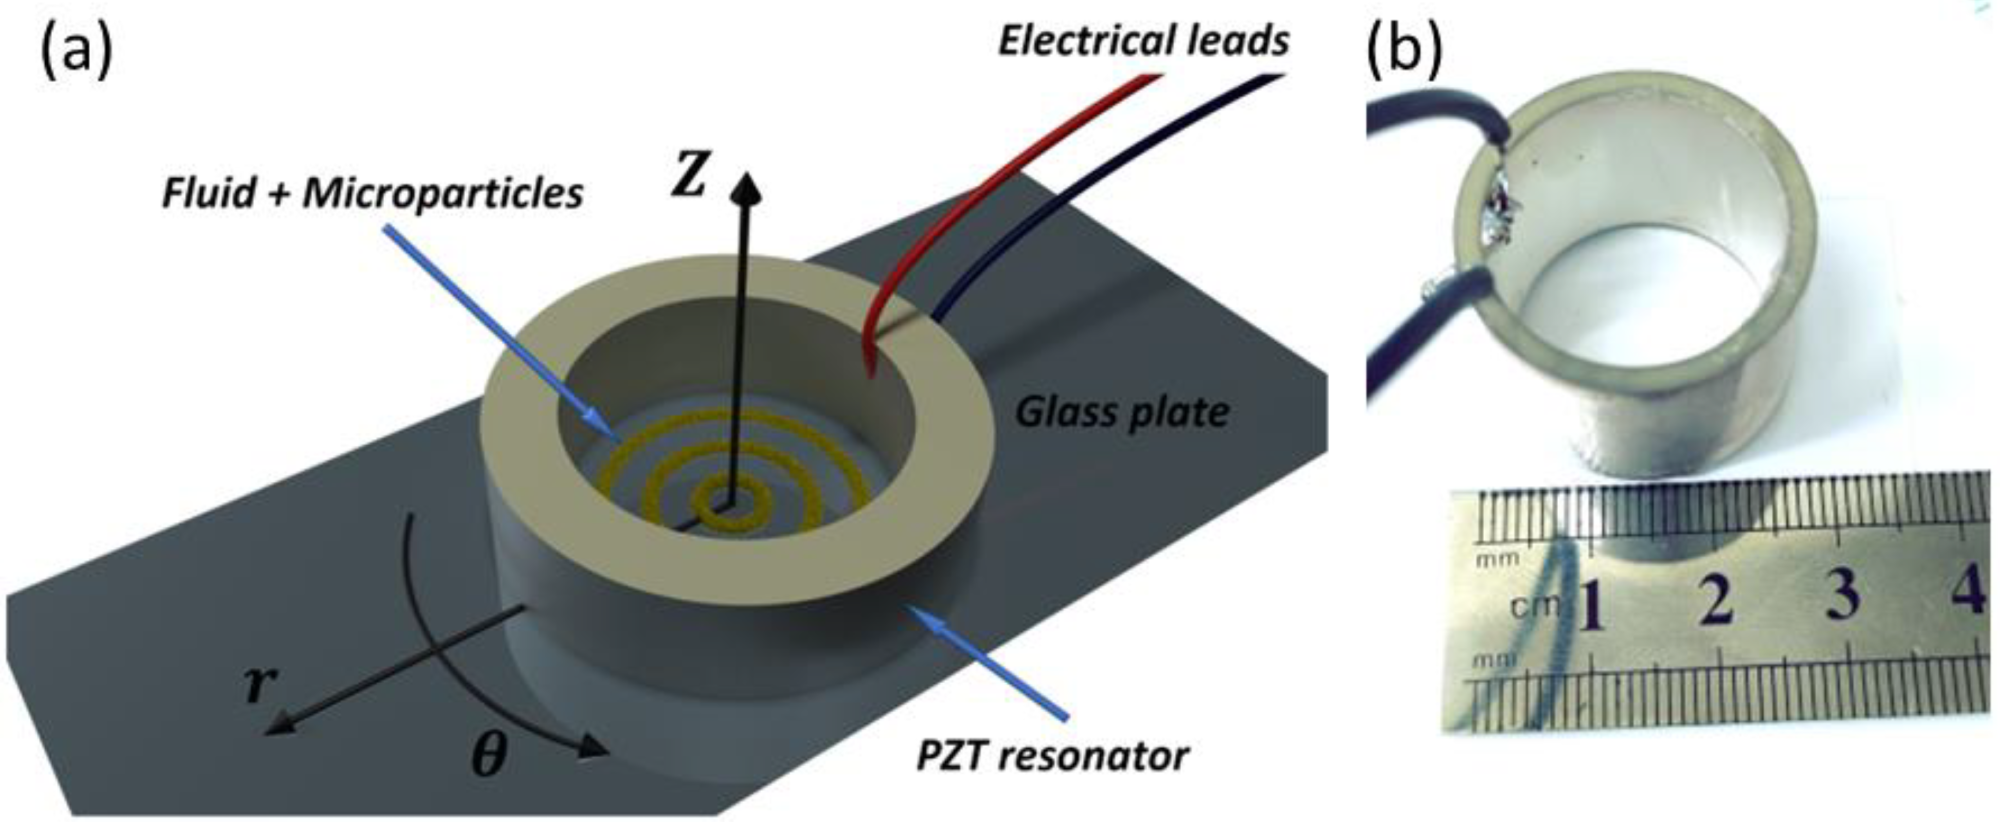 (a) Illustration (not to scale) of the experimental in vitro apparatus. The dispersed micro particles are inserted into the piezoelectric resonator. They are driven towards nodal areas and form rings upon activation of the acoustic waves. (b) Photograph of the in vitro apparatus.